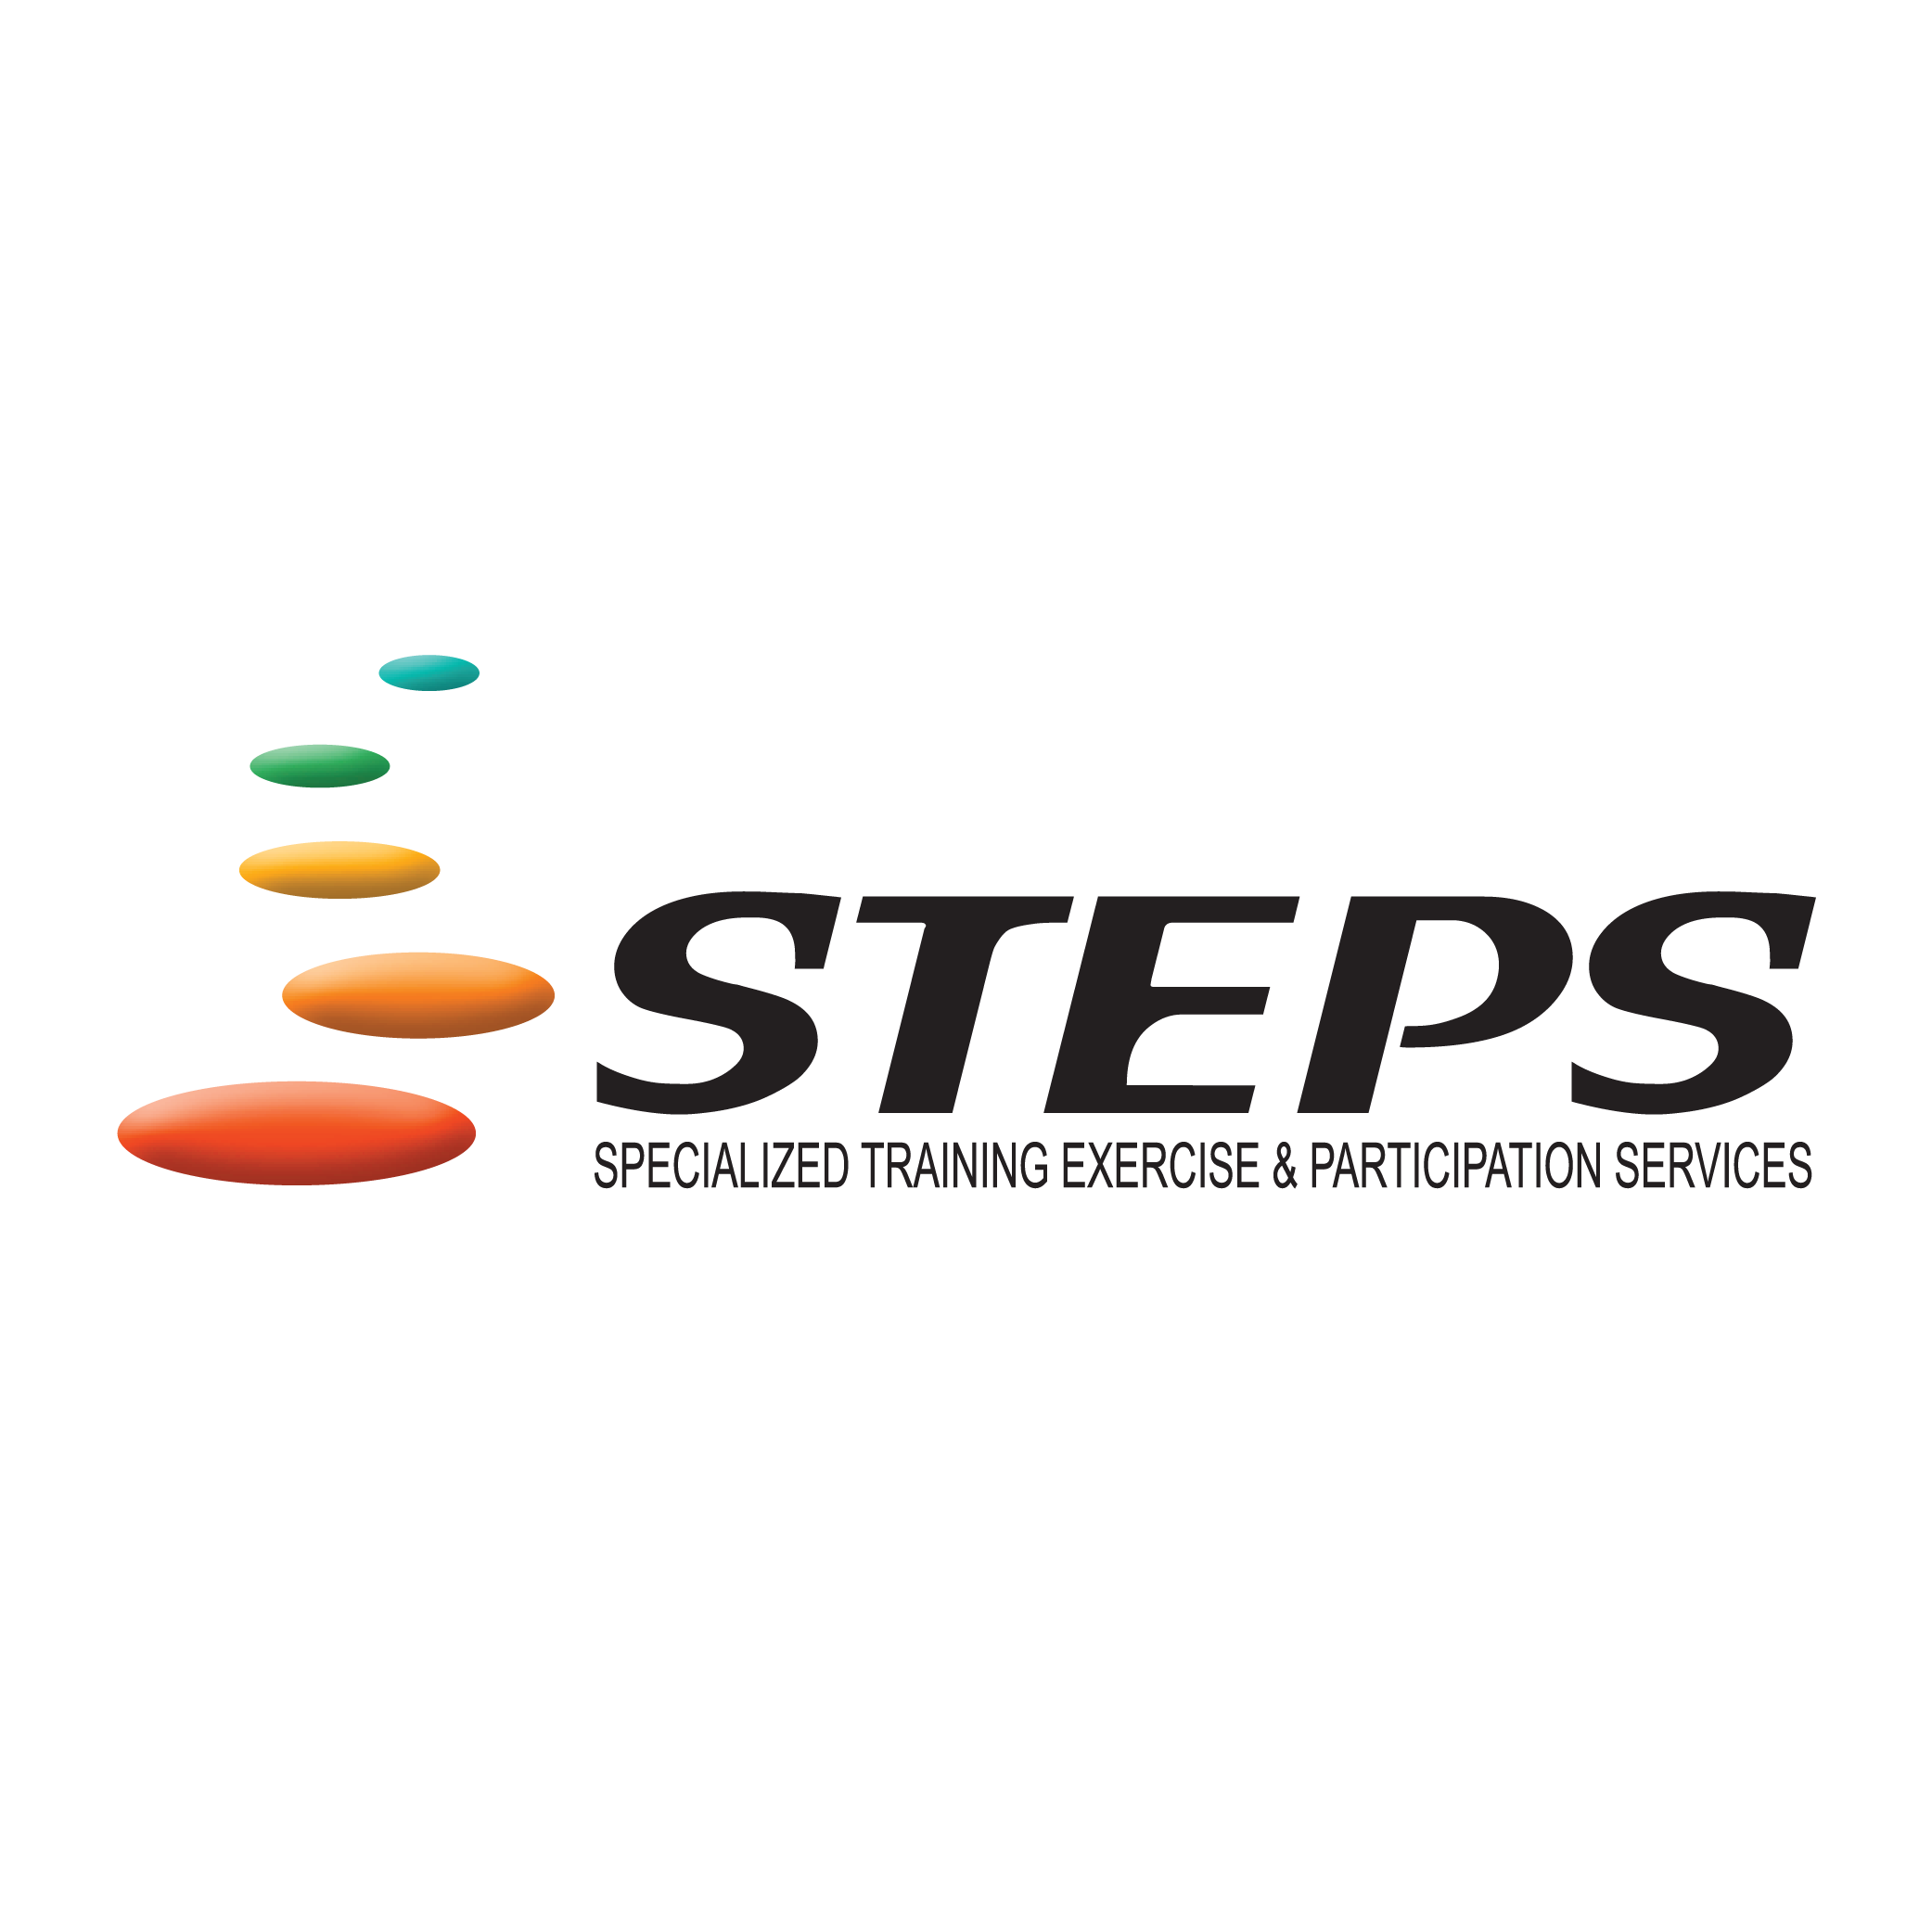 STEPS Specialized Training Exercise & Participation Services. 
We work with you every STEP of the way to determine and meet your exercise and wellness goals.